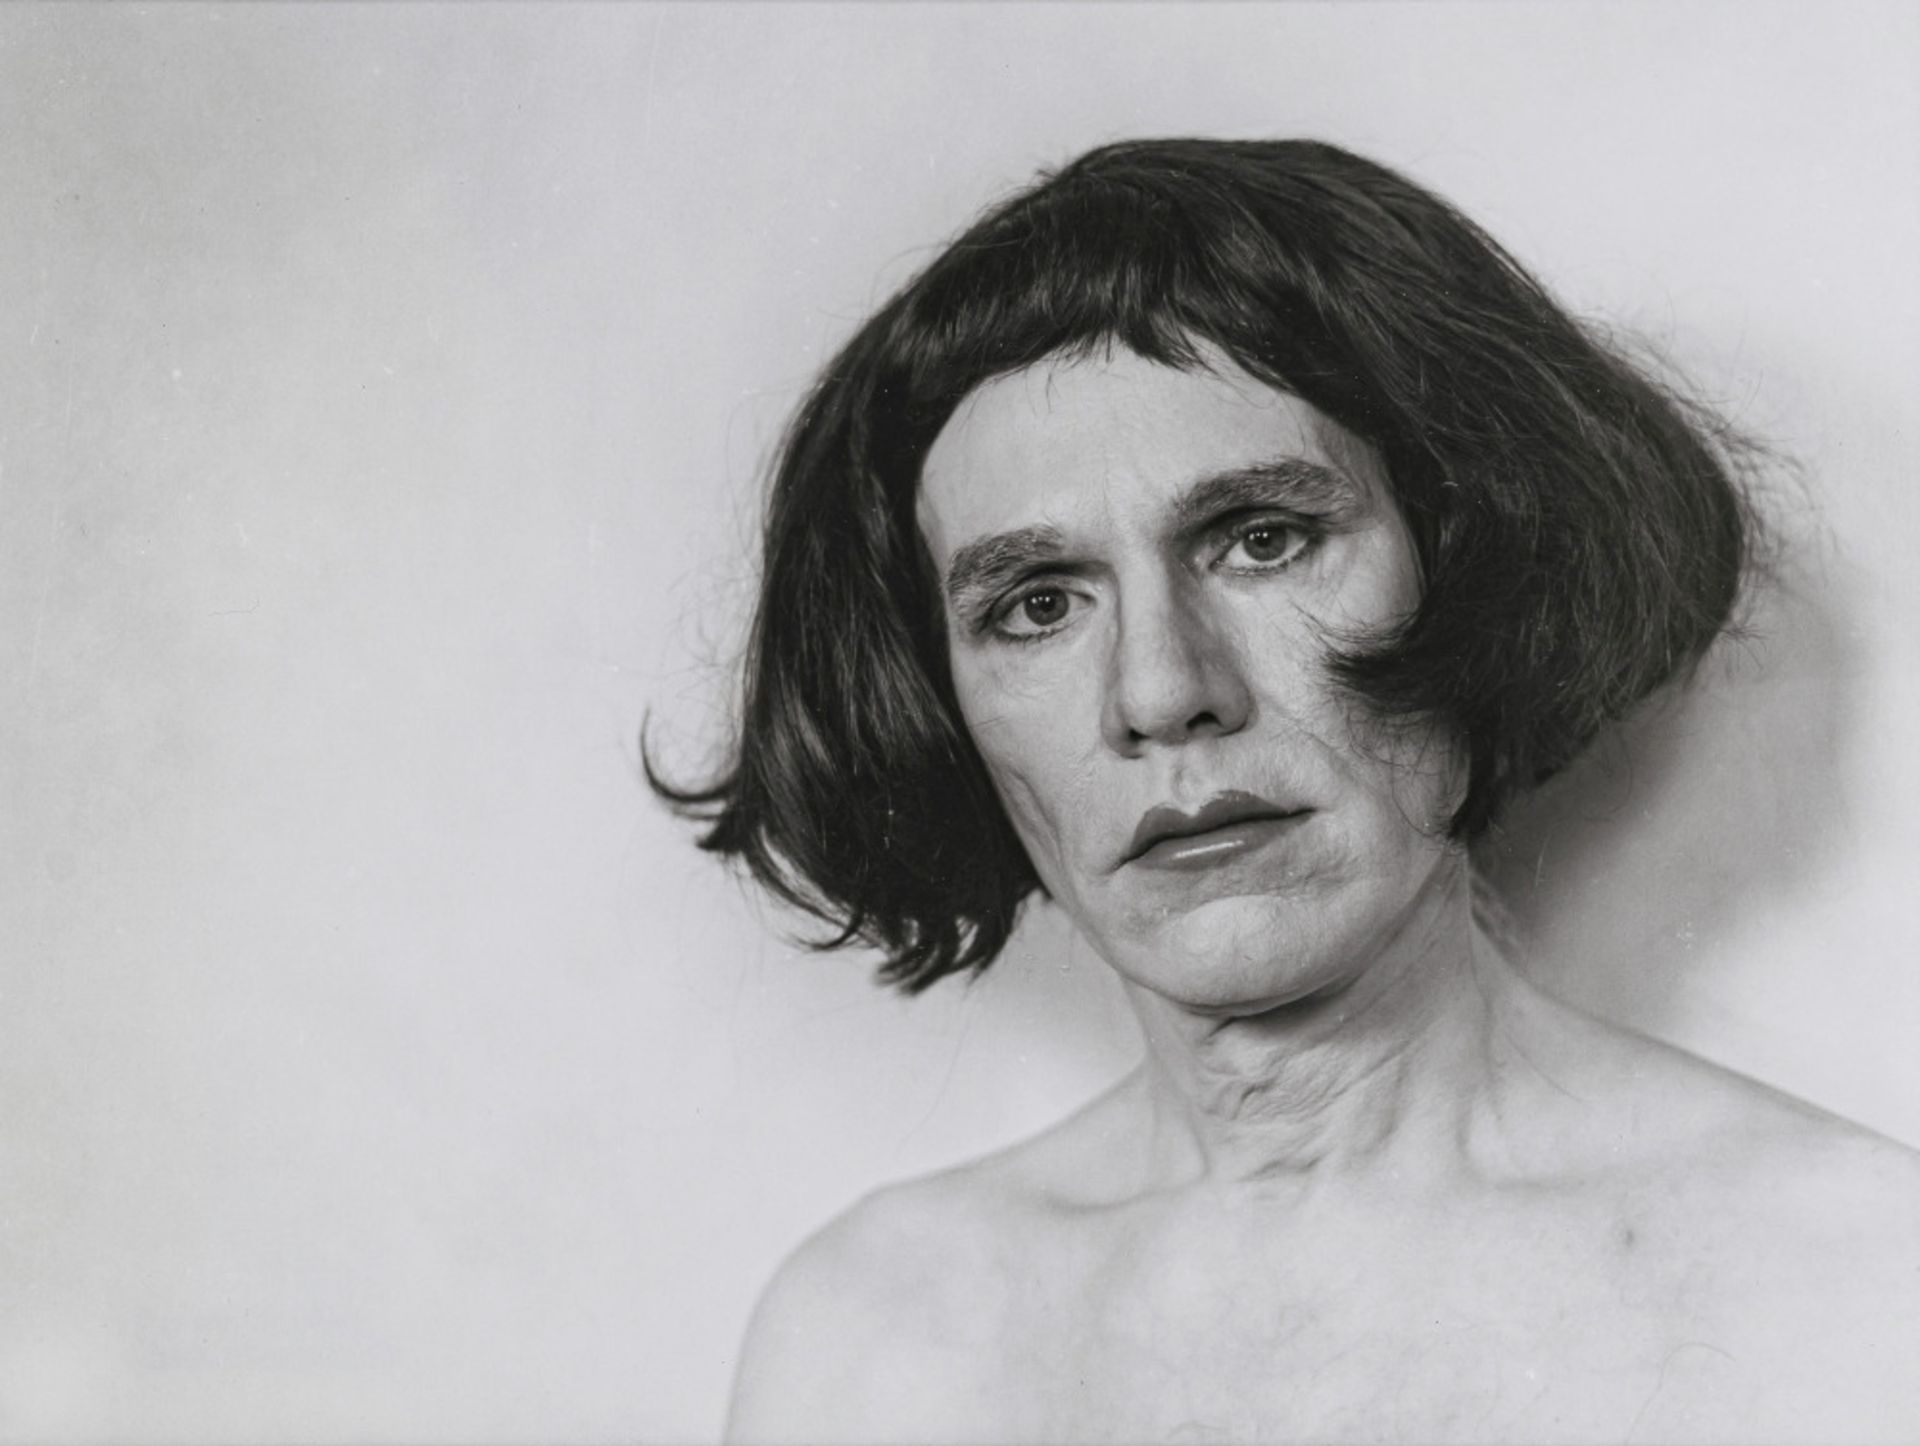 Christopher Makos - Andy Warhol with 6 different wigs from the Altered Images series. 1981/2001 - Image 2 of 7